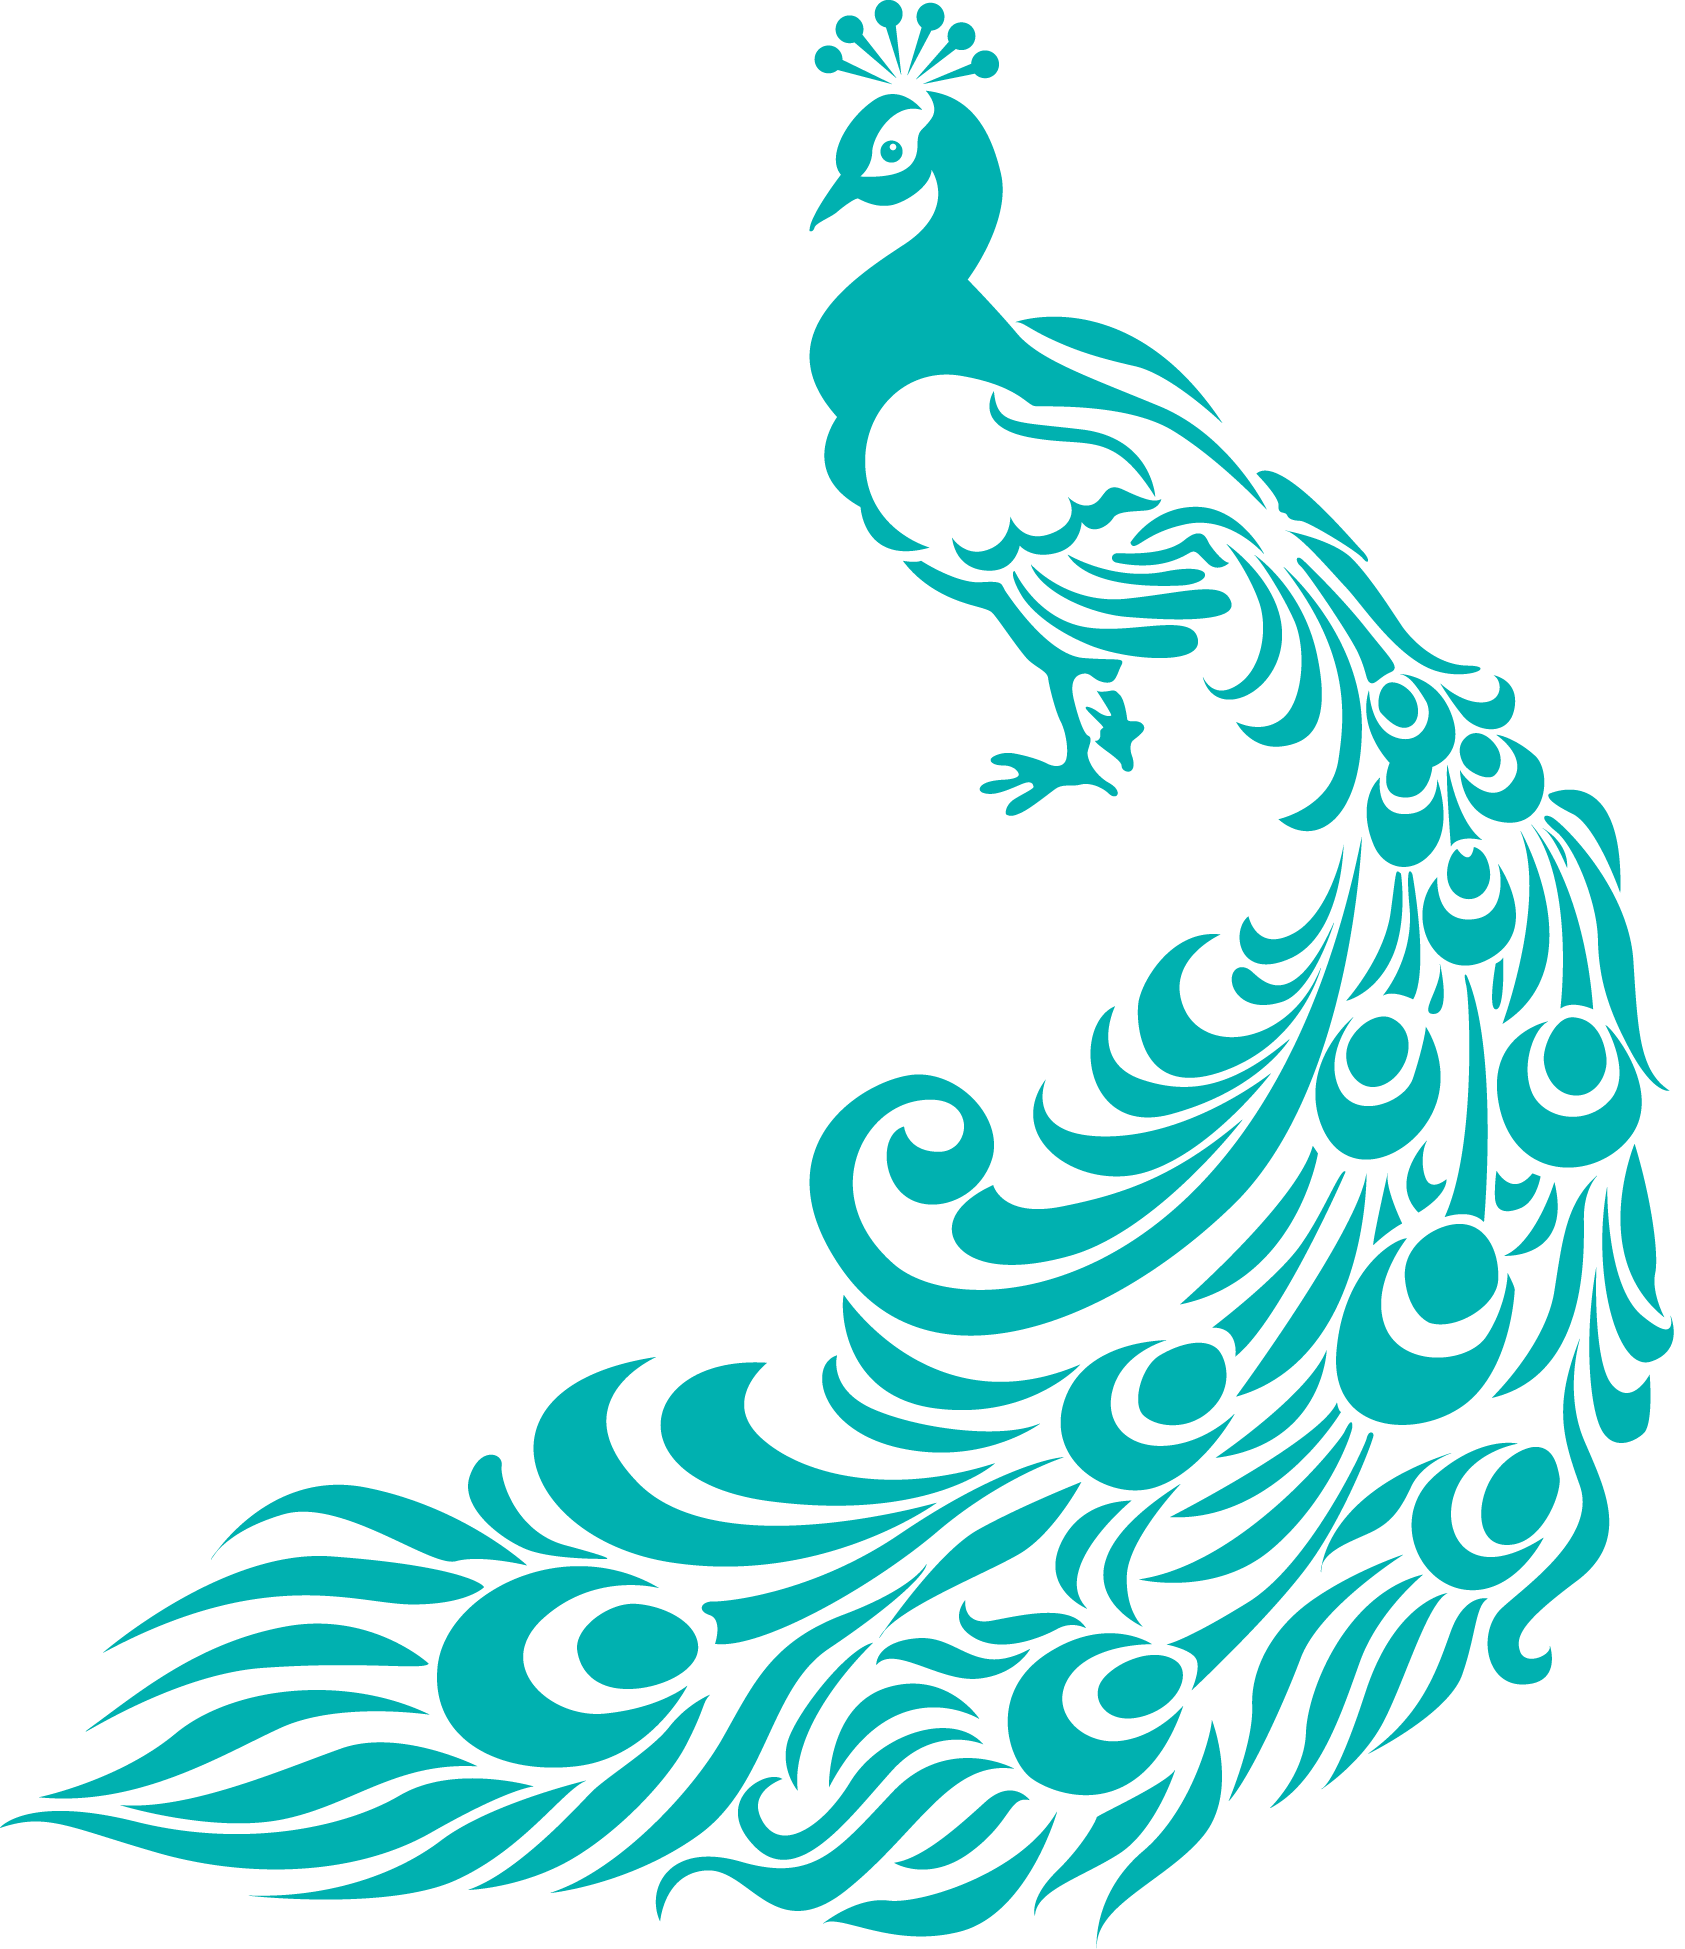 Crowning ceremony of the. Clipart designs peacock